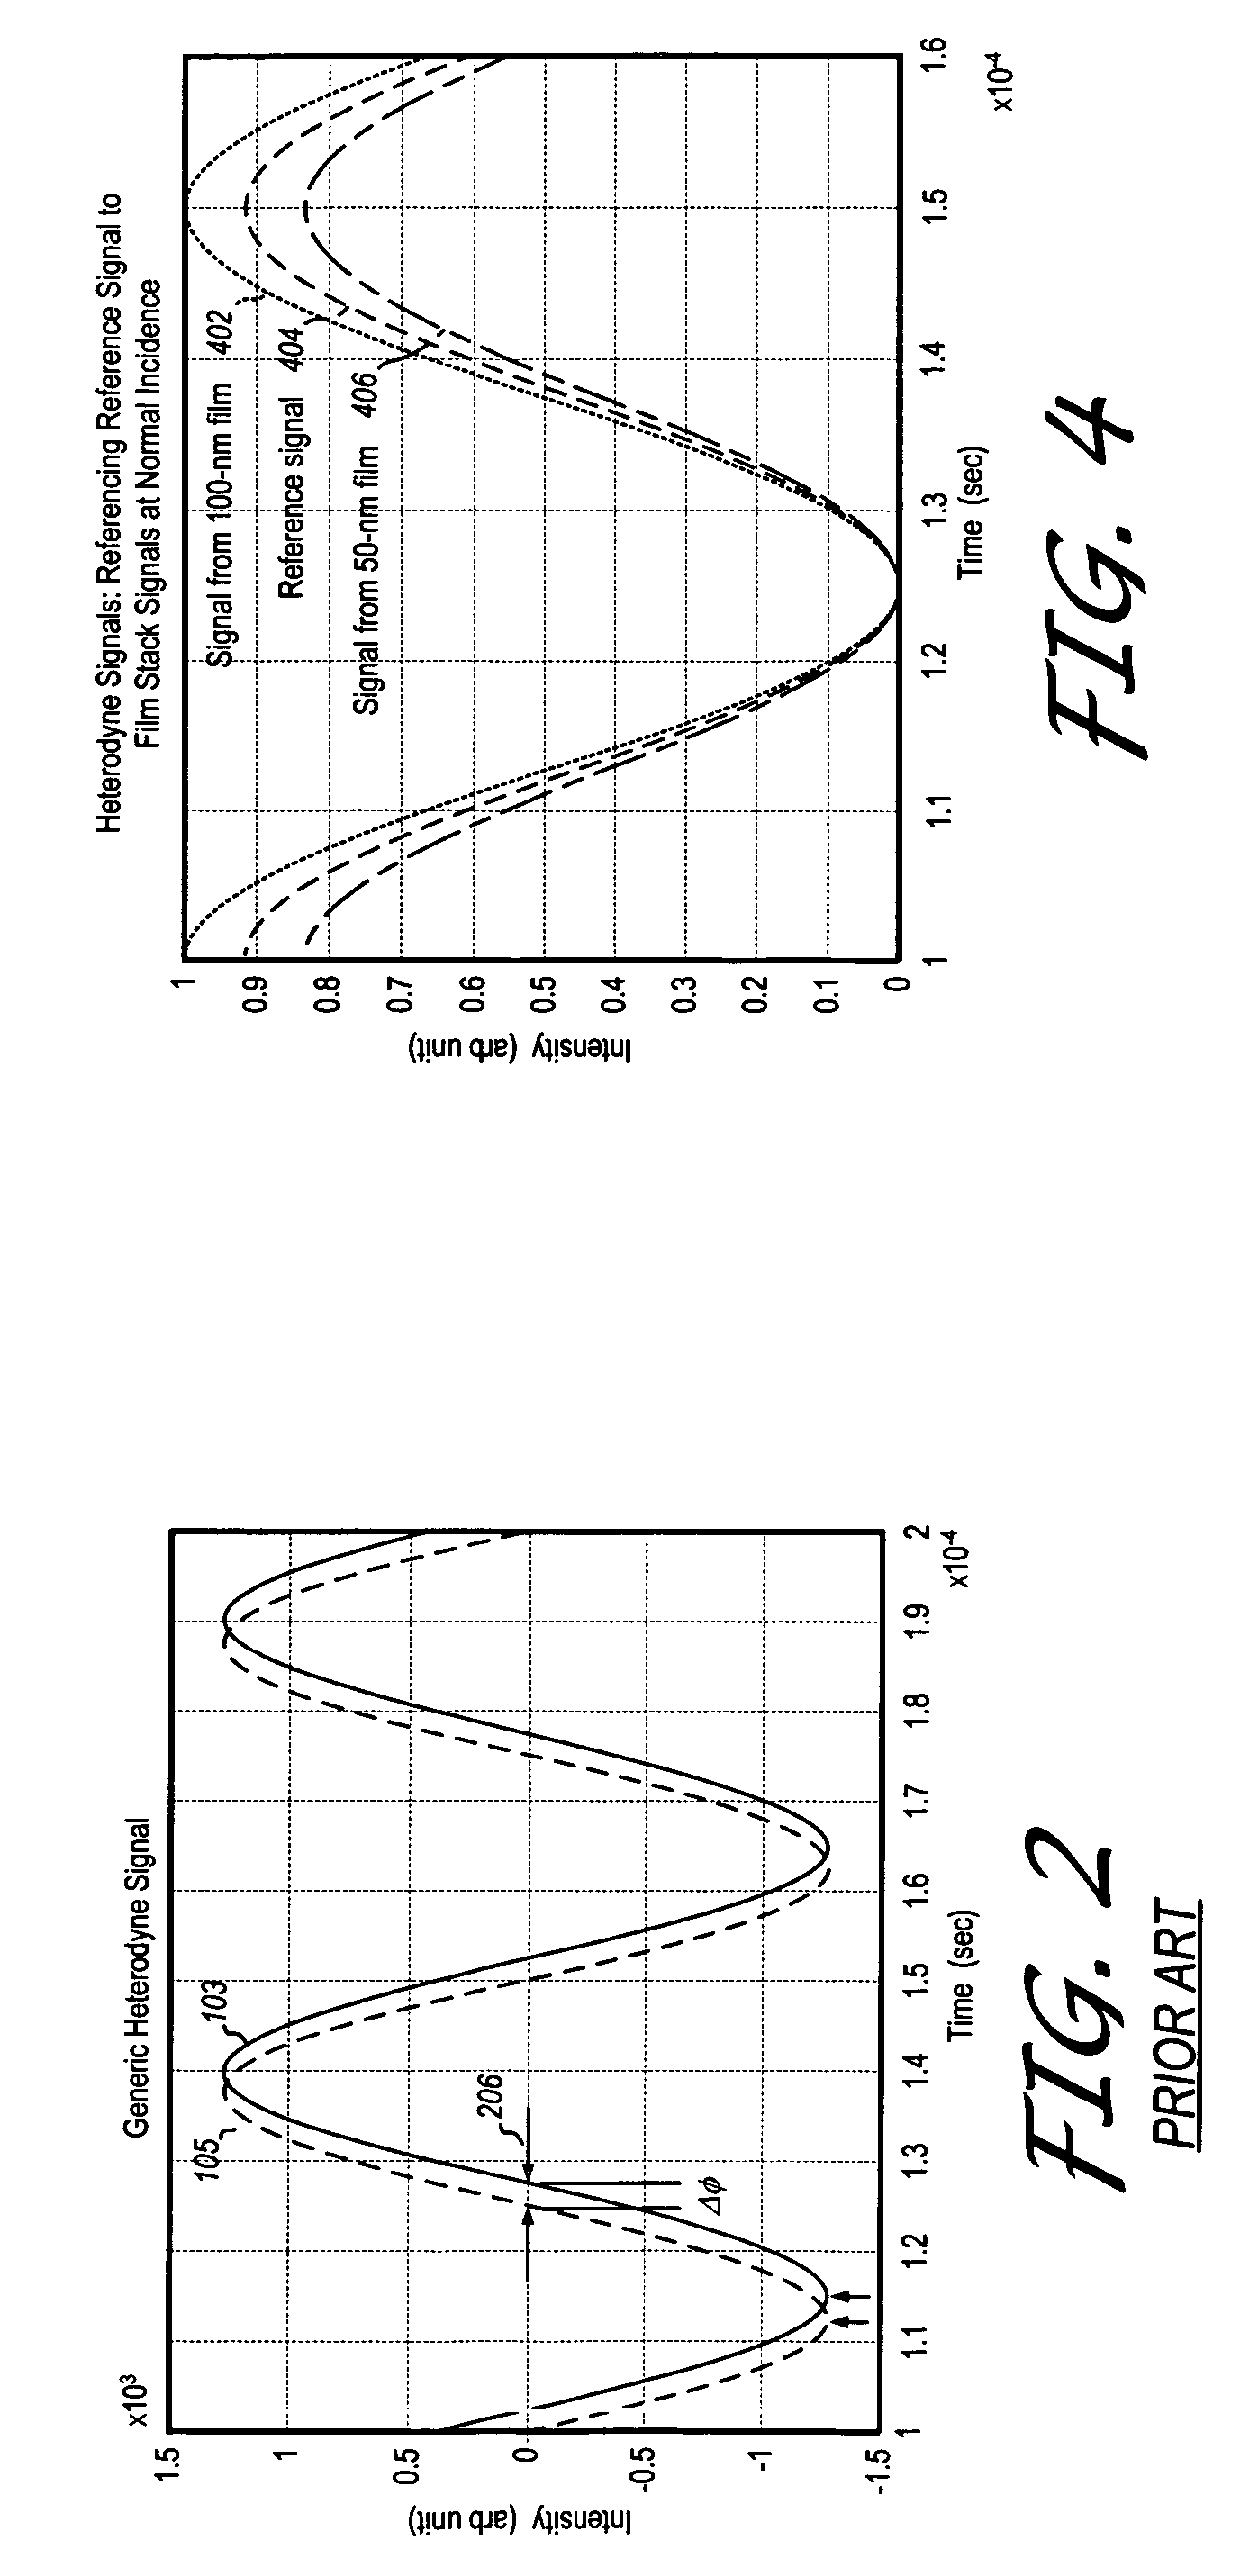 Heterodyne reflectometer for film thickness monitoring and method for implementing